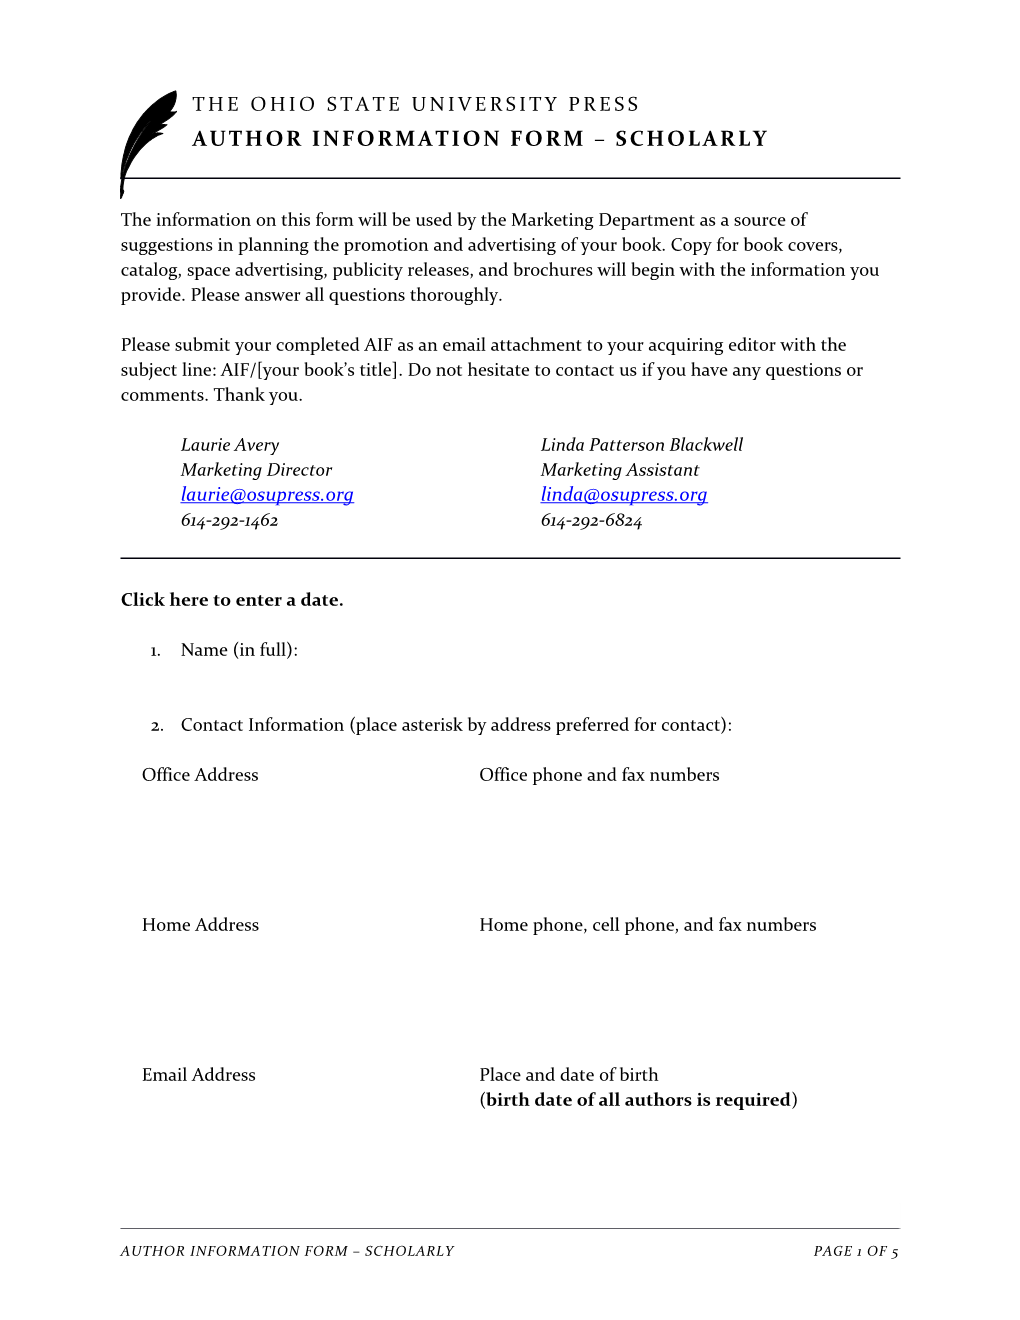 Author Information Form Scholarly